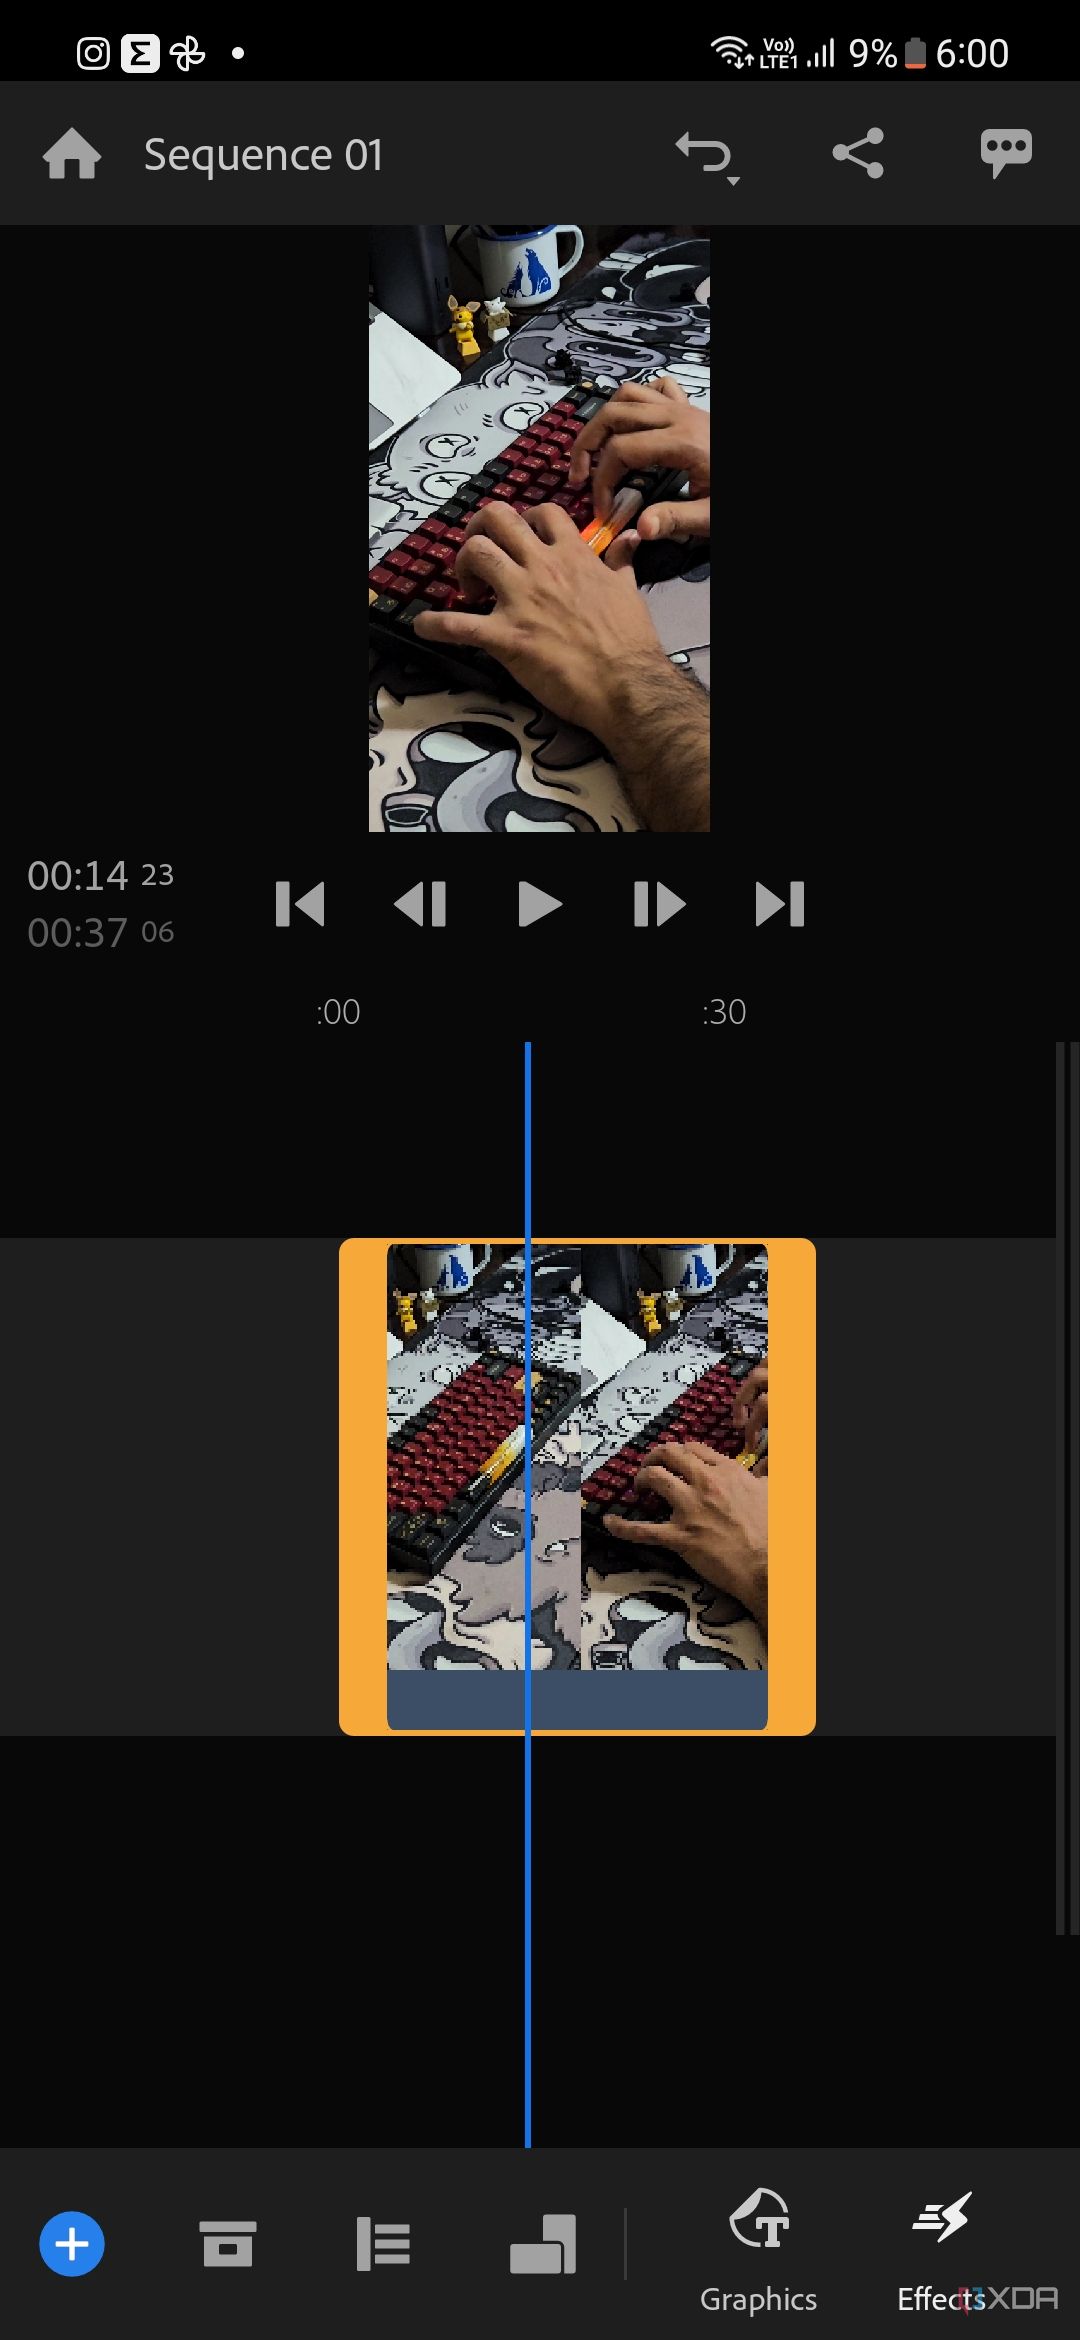 A screenshot captured on the Galaxy S23 showing the edit screen of Adobe Premiere Rush app.